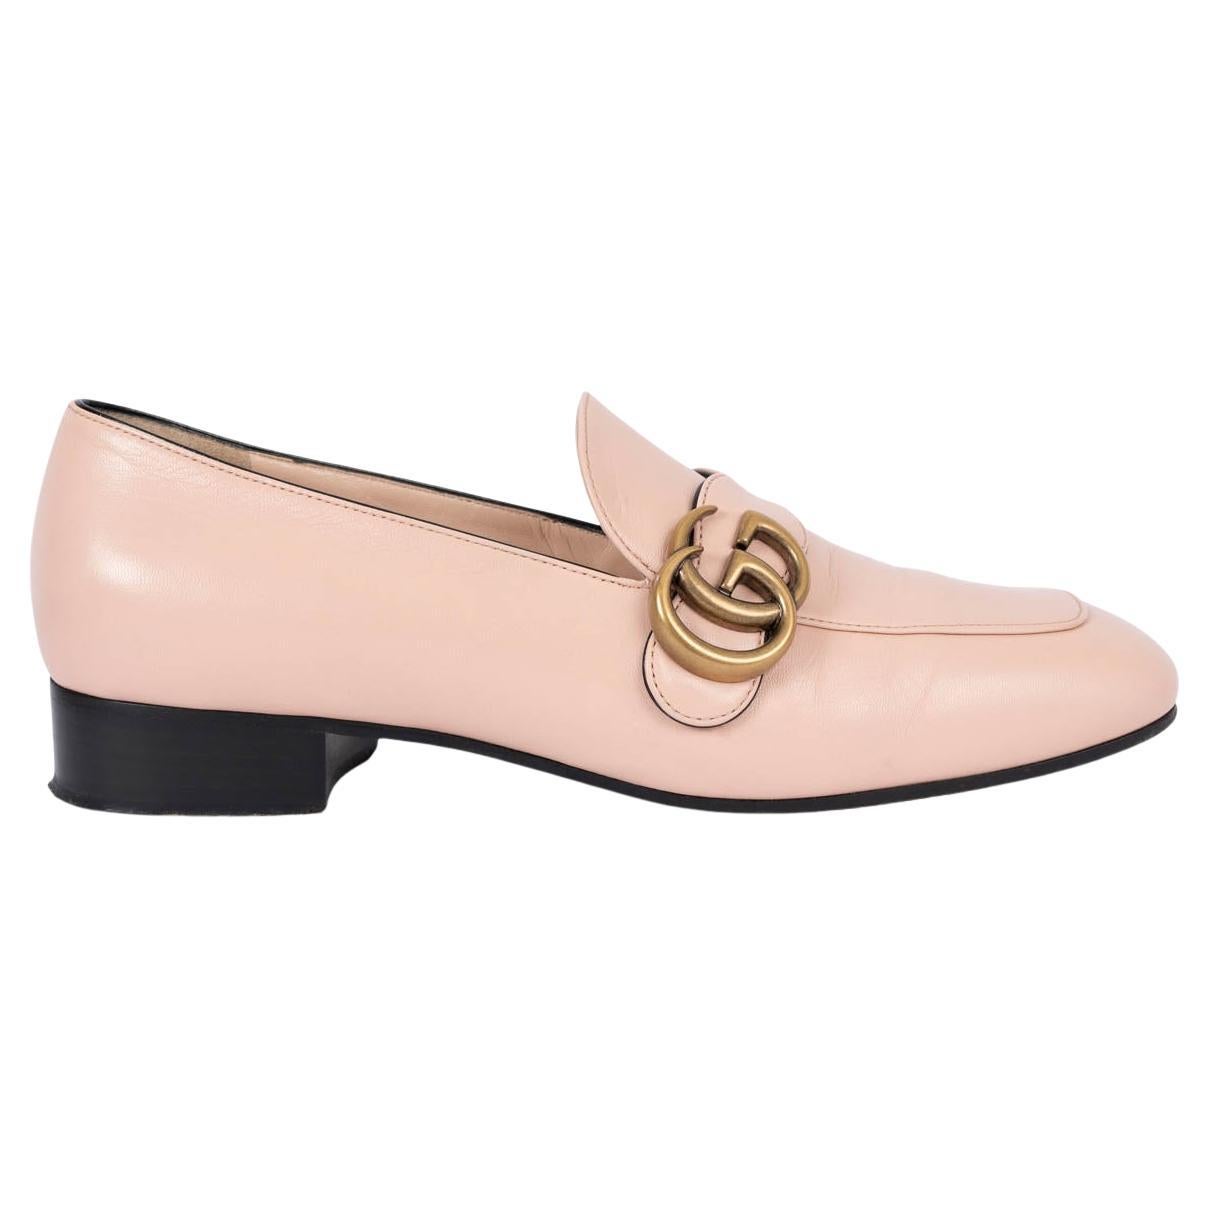 GUCCI light pink leather GG MARMONT Loafers Shoes 37.5 For Sale